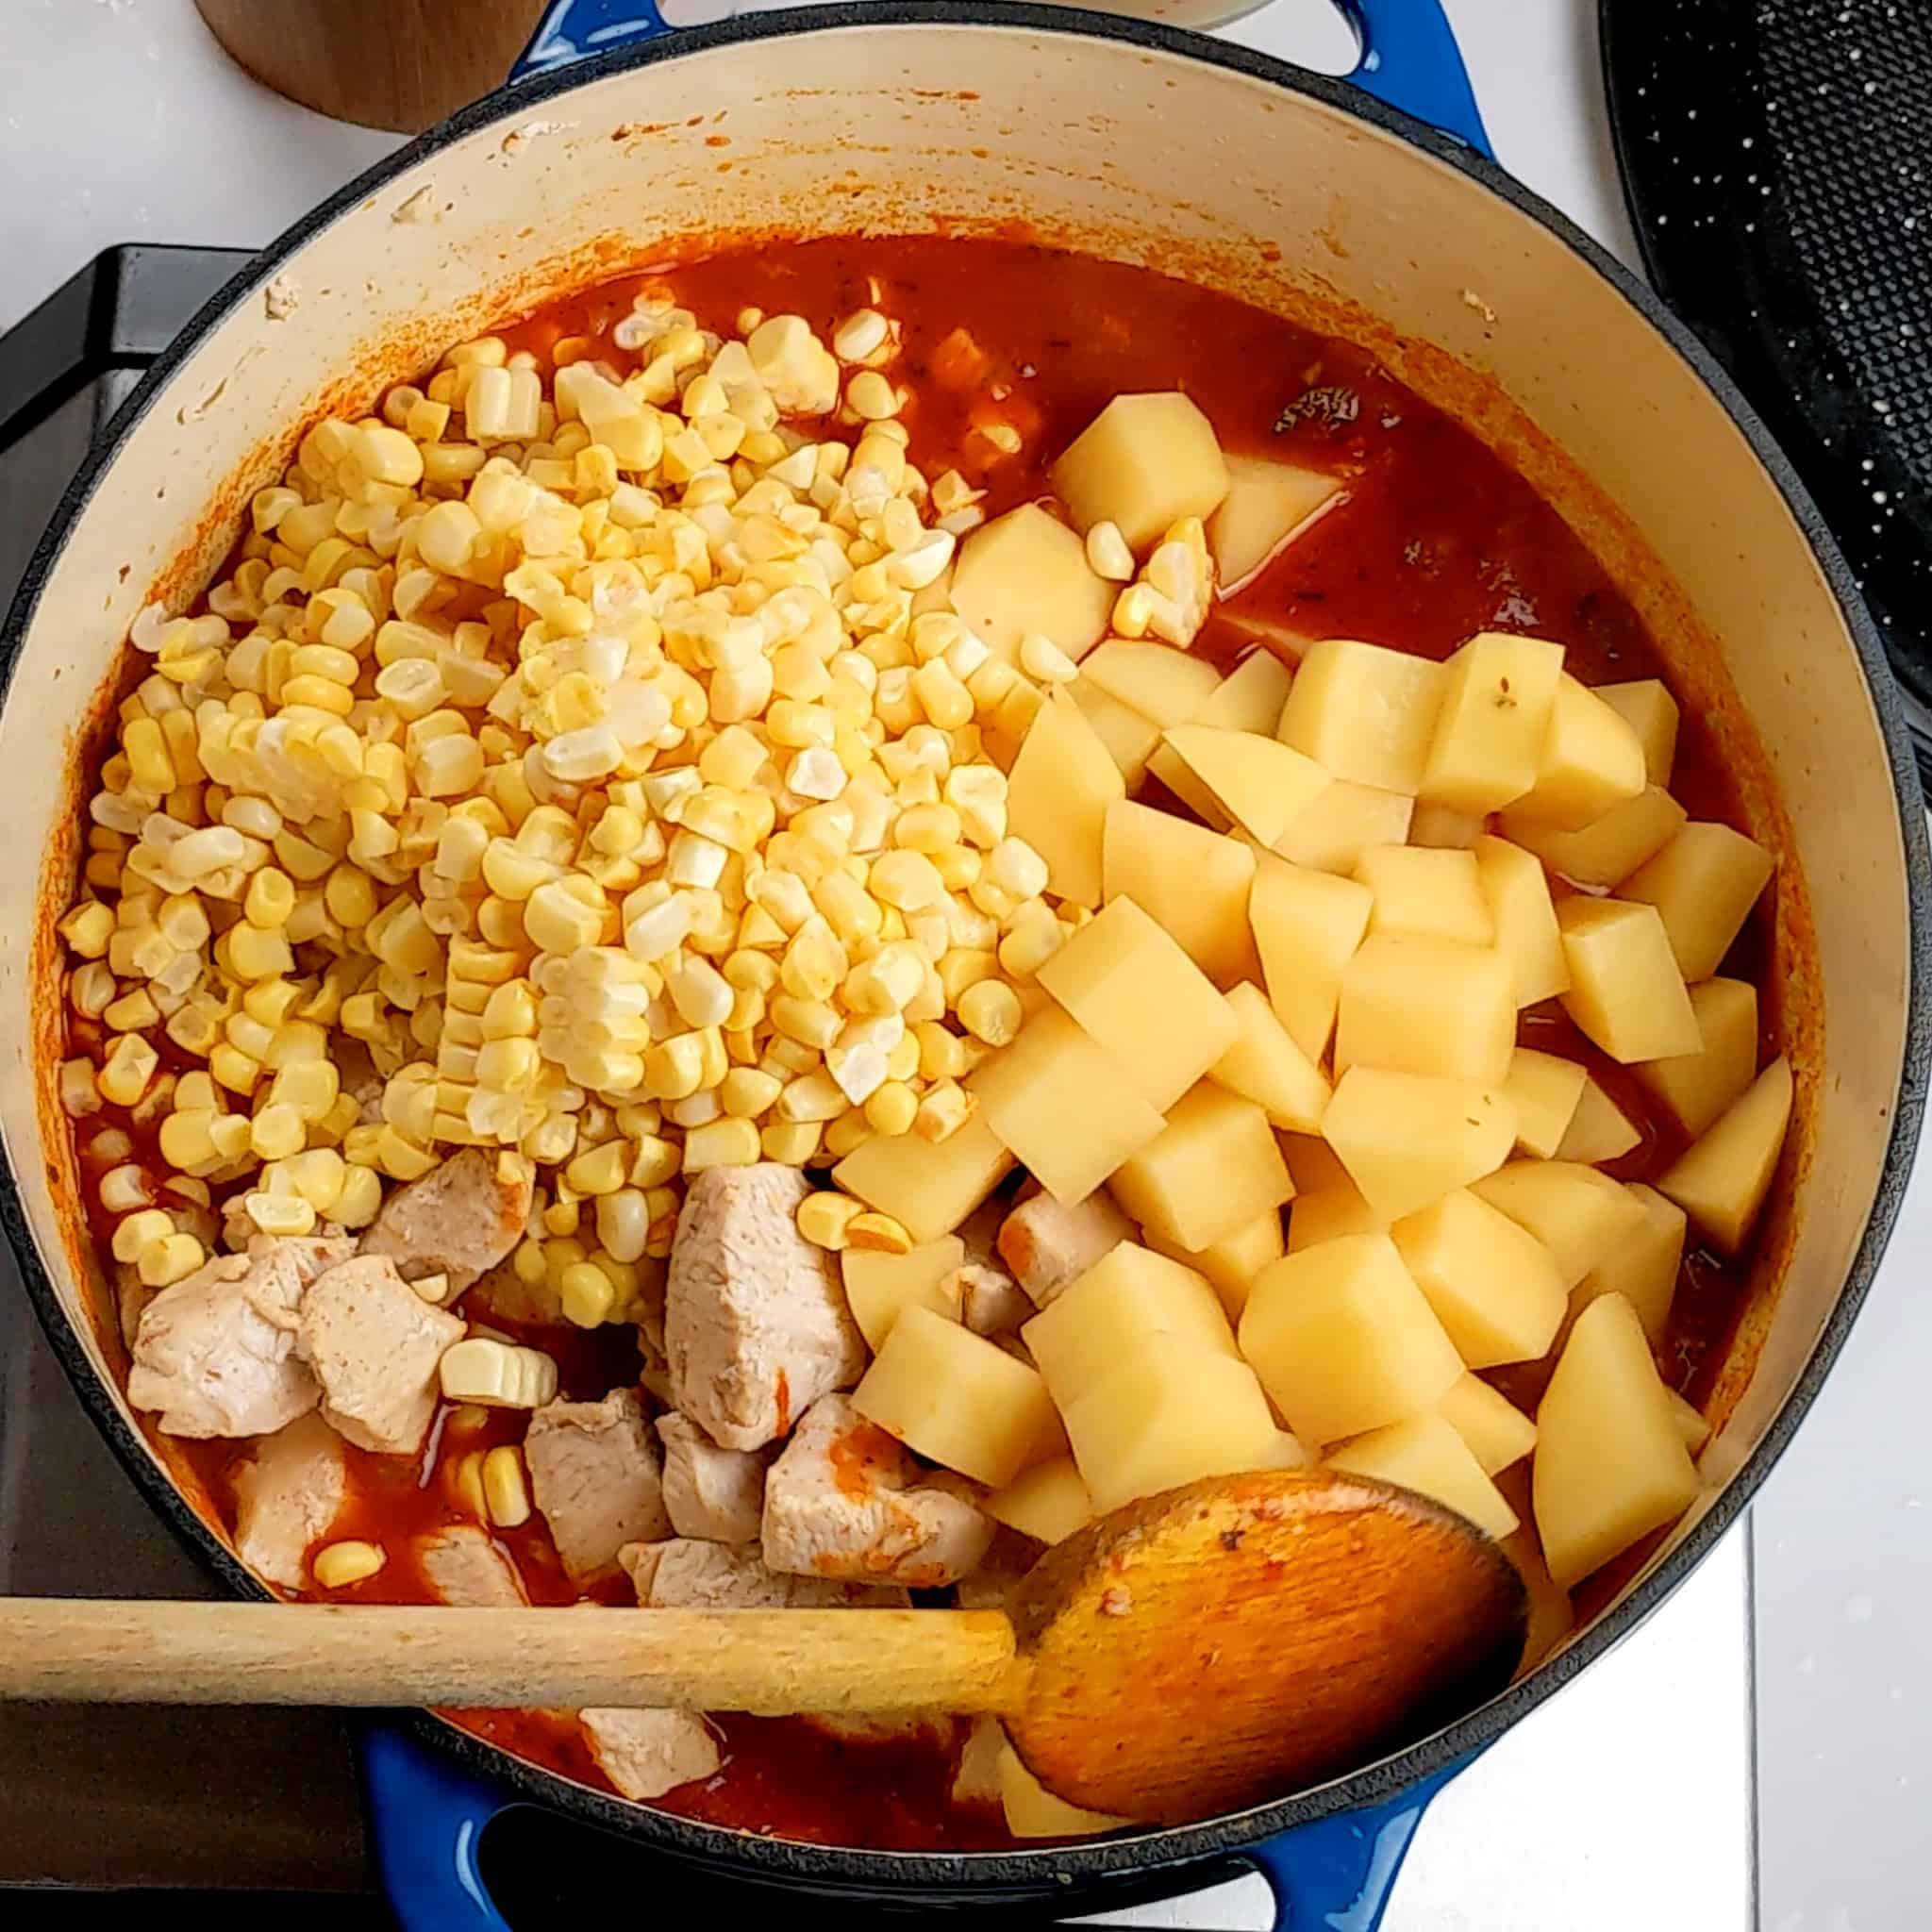 the tomato base topped with diced yukon gold potatoes, fresh corn kernels and diced chicken